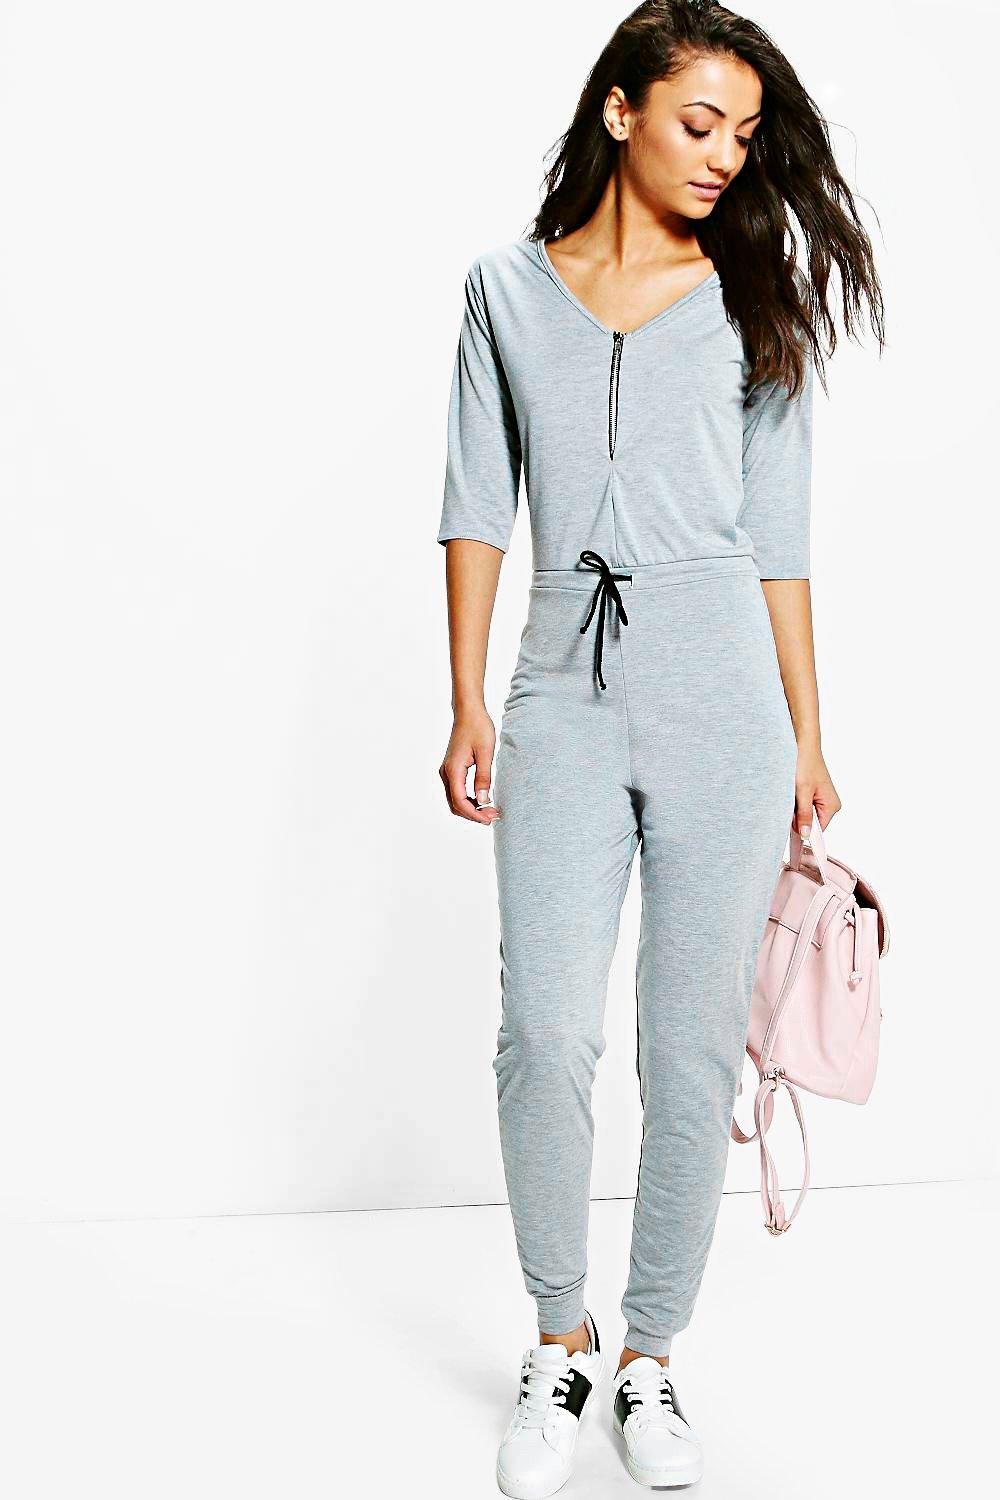 Boohoo Womens Tall Kitty Zip Front Drawcord Lounge Jumpsuit | eBay